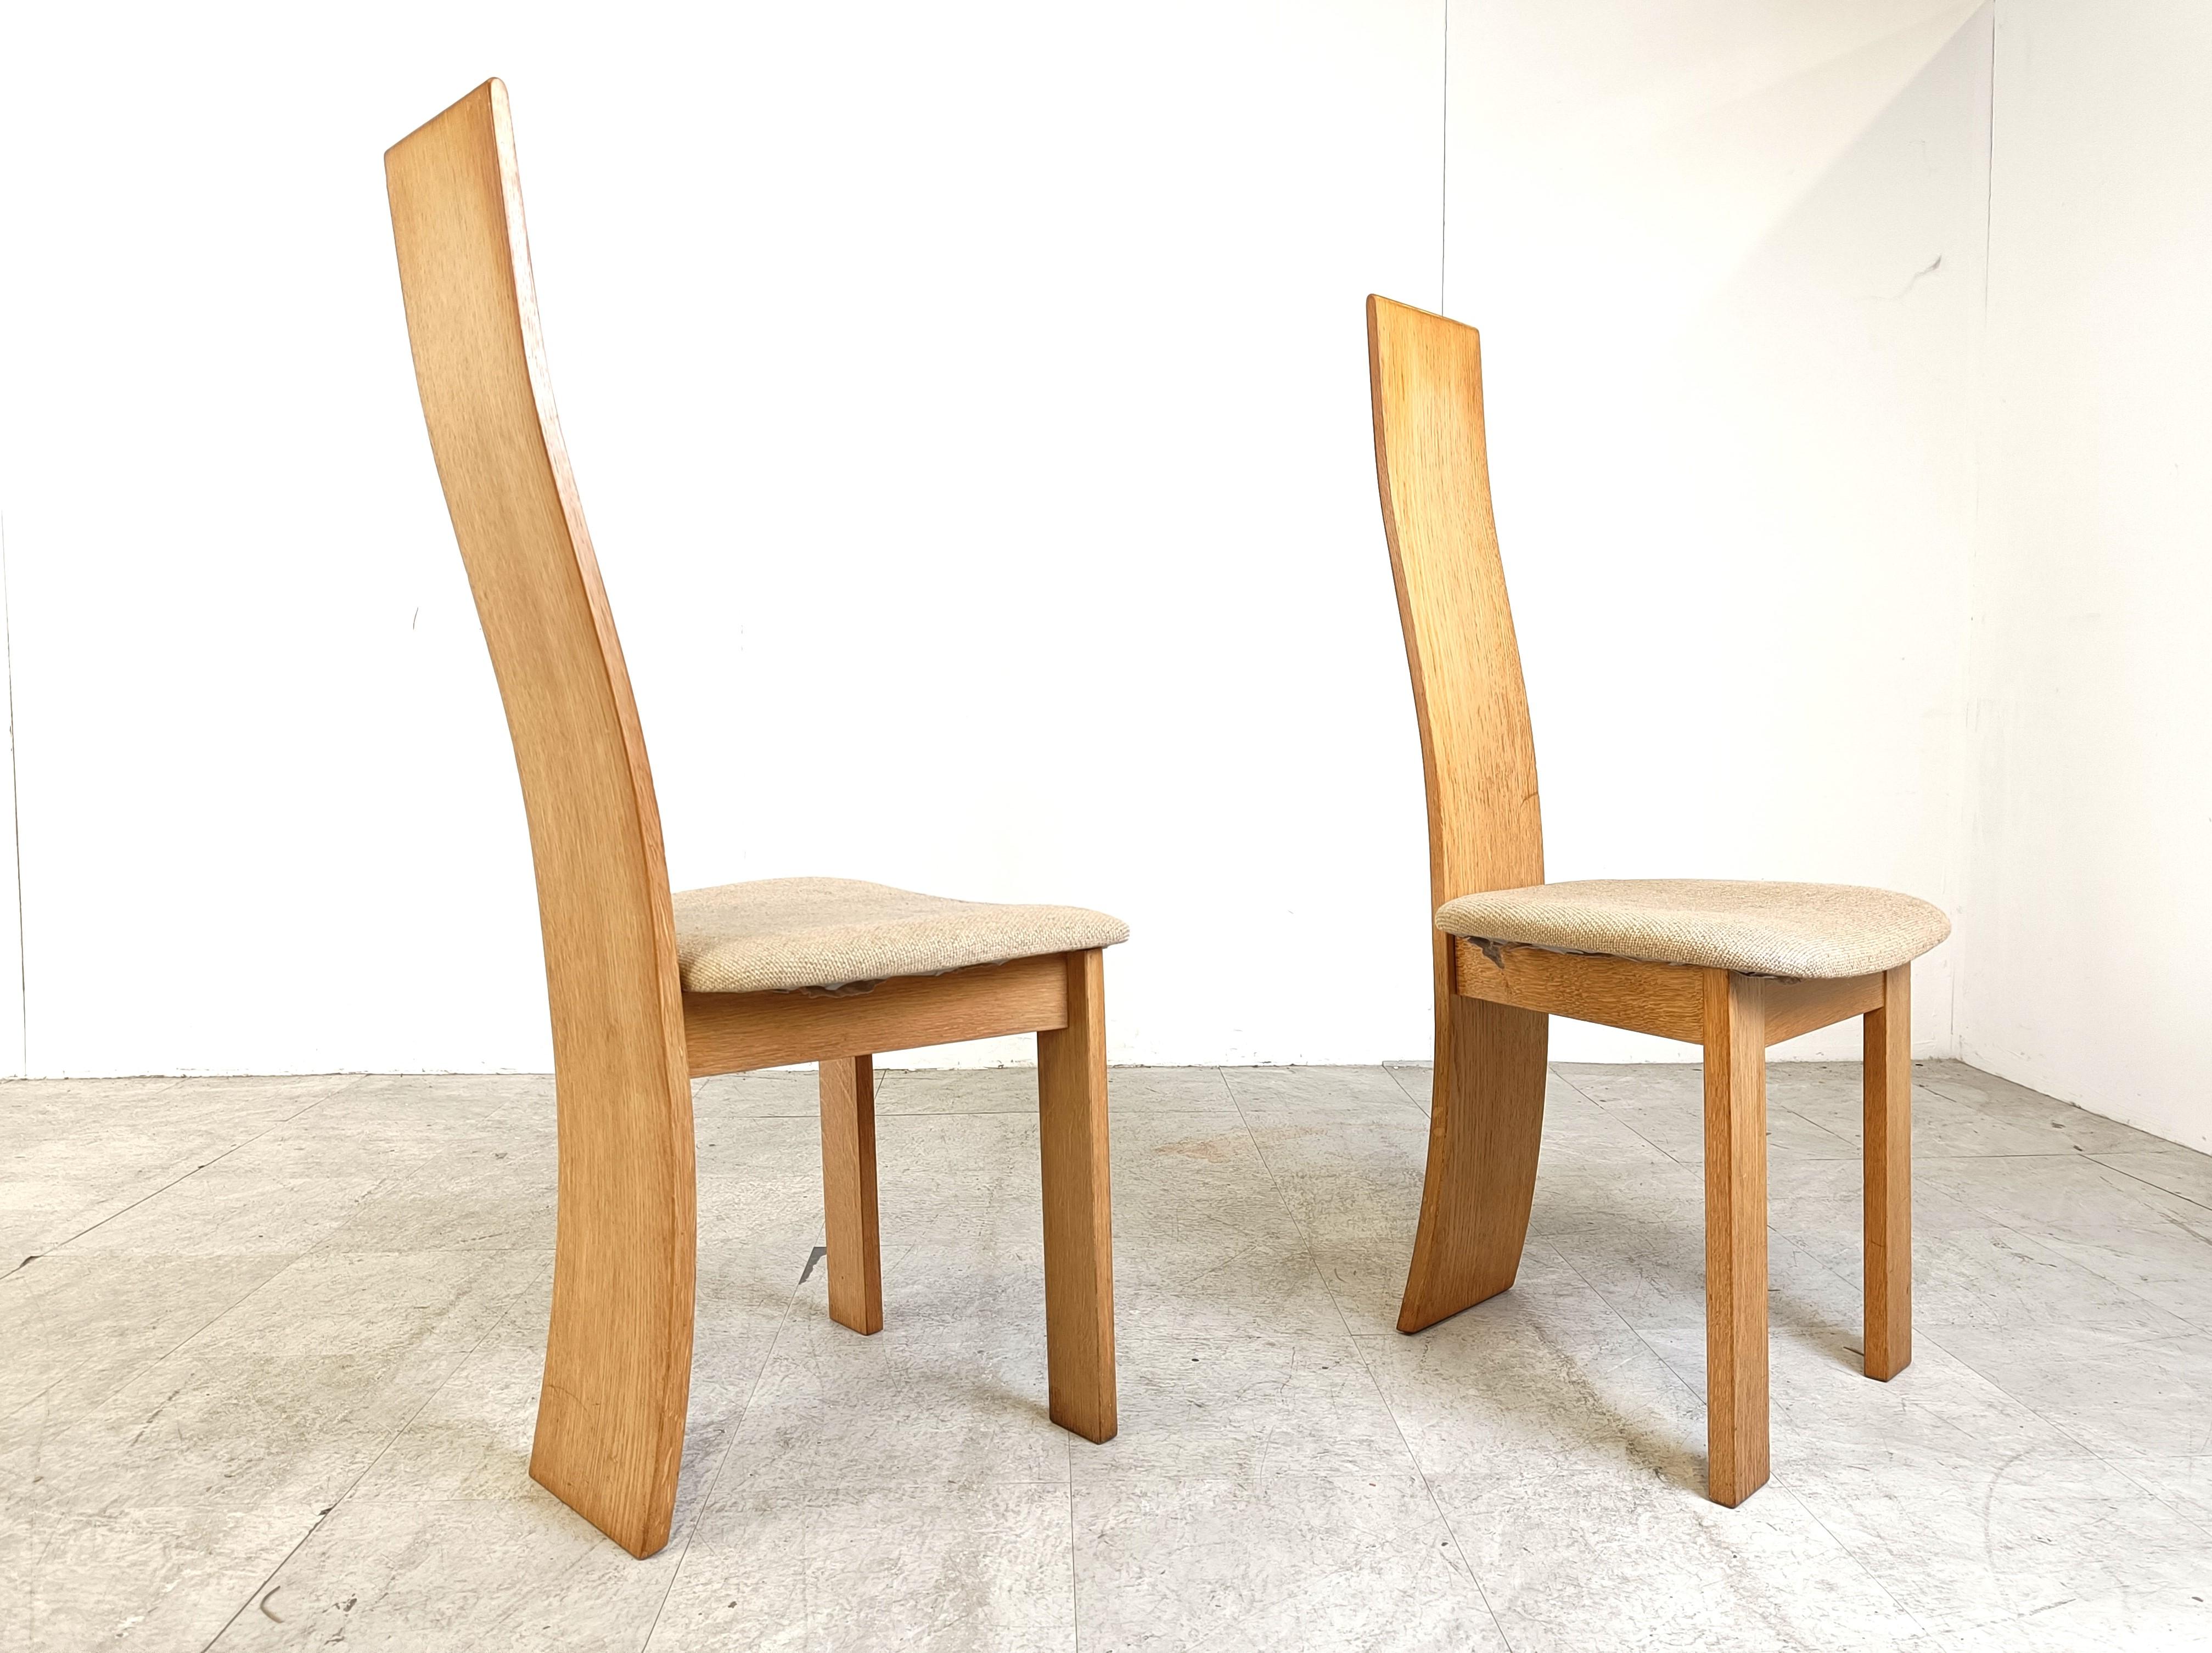 
Elegant, sculptural high back dining chairs by Vanden Berghe Pauvers.

Upholstered with dark beige fabric.

Good condition

Dimensions:
Height: 108cm/42.51